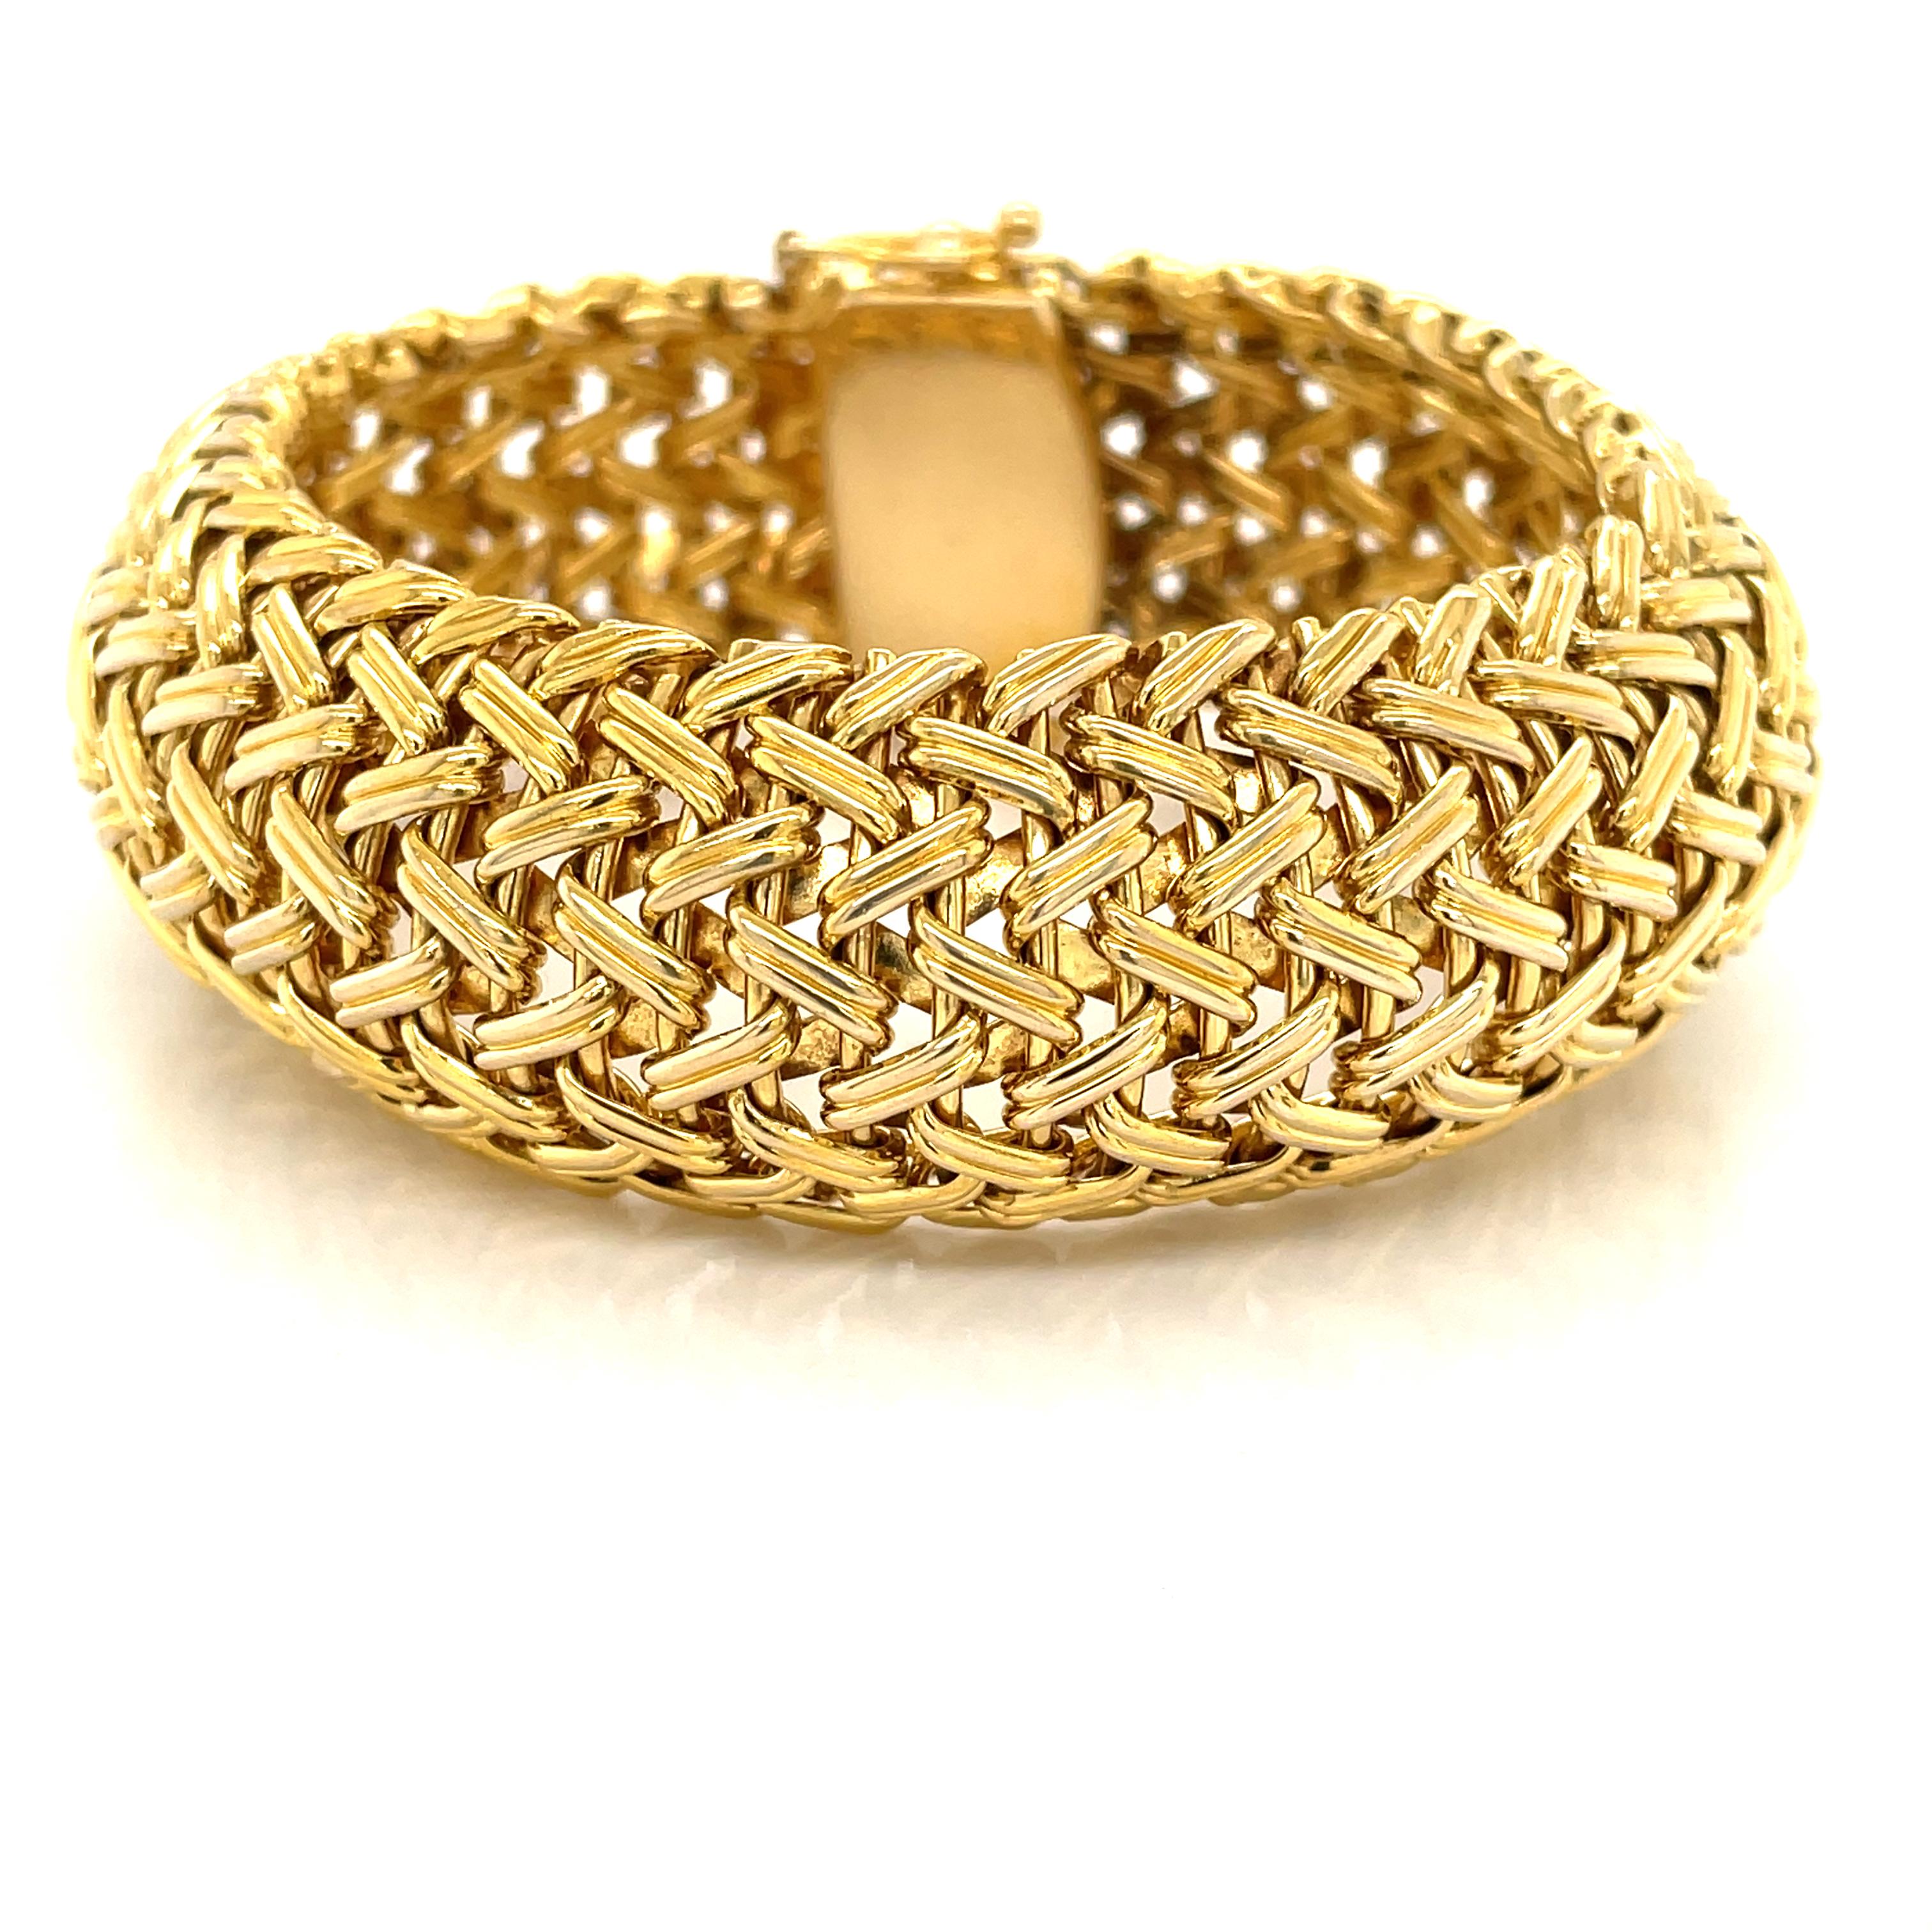 Striking in woven fourteen karat 14K yellow gold, this uniquely contoured bracelet is a pinnacle retro style and certainly coveted and relevant today. Of generous weight with an emphasis on quality craftsmanship,  this stunning bracelet presents a